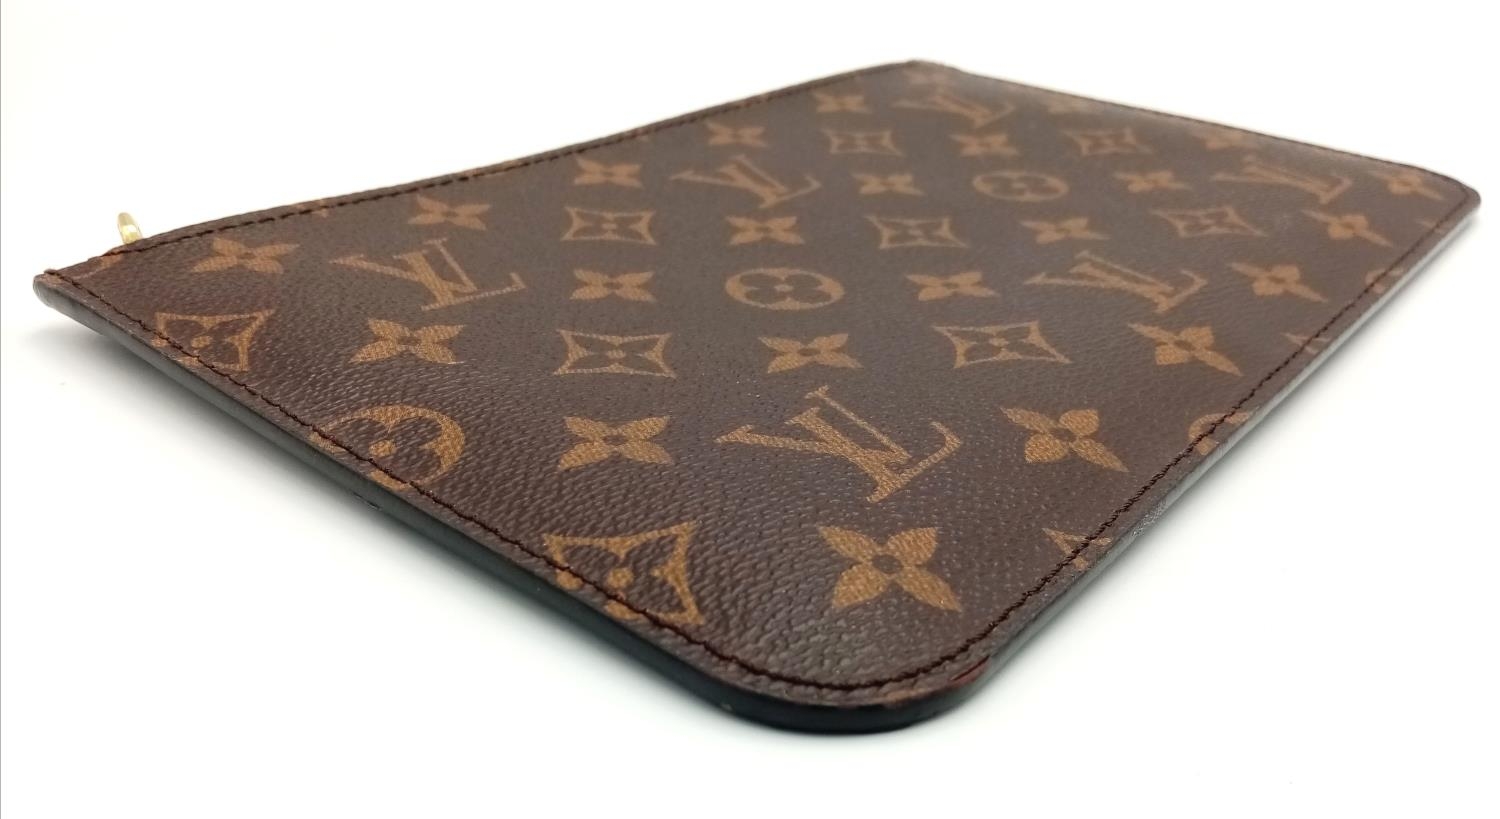 A Louis Vuitton Neverfull Pochette. Monogramed canvas exterior with gold-toned hardware and zip - Image 3 of 7